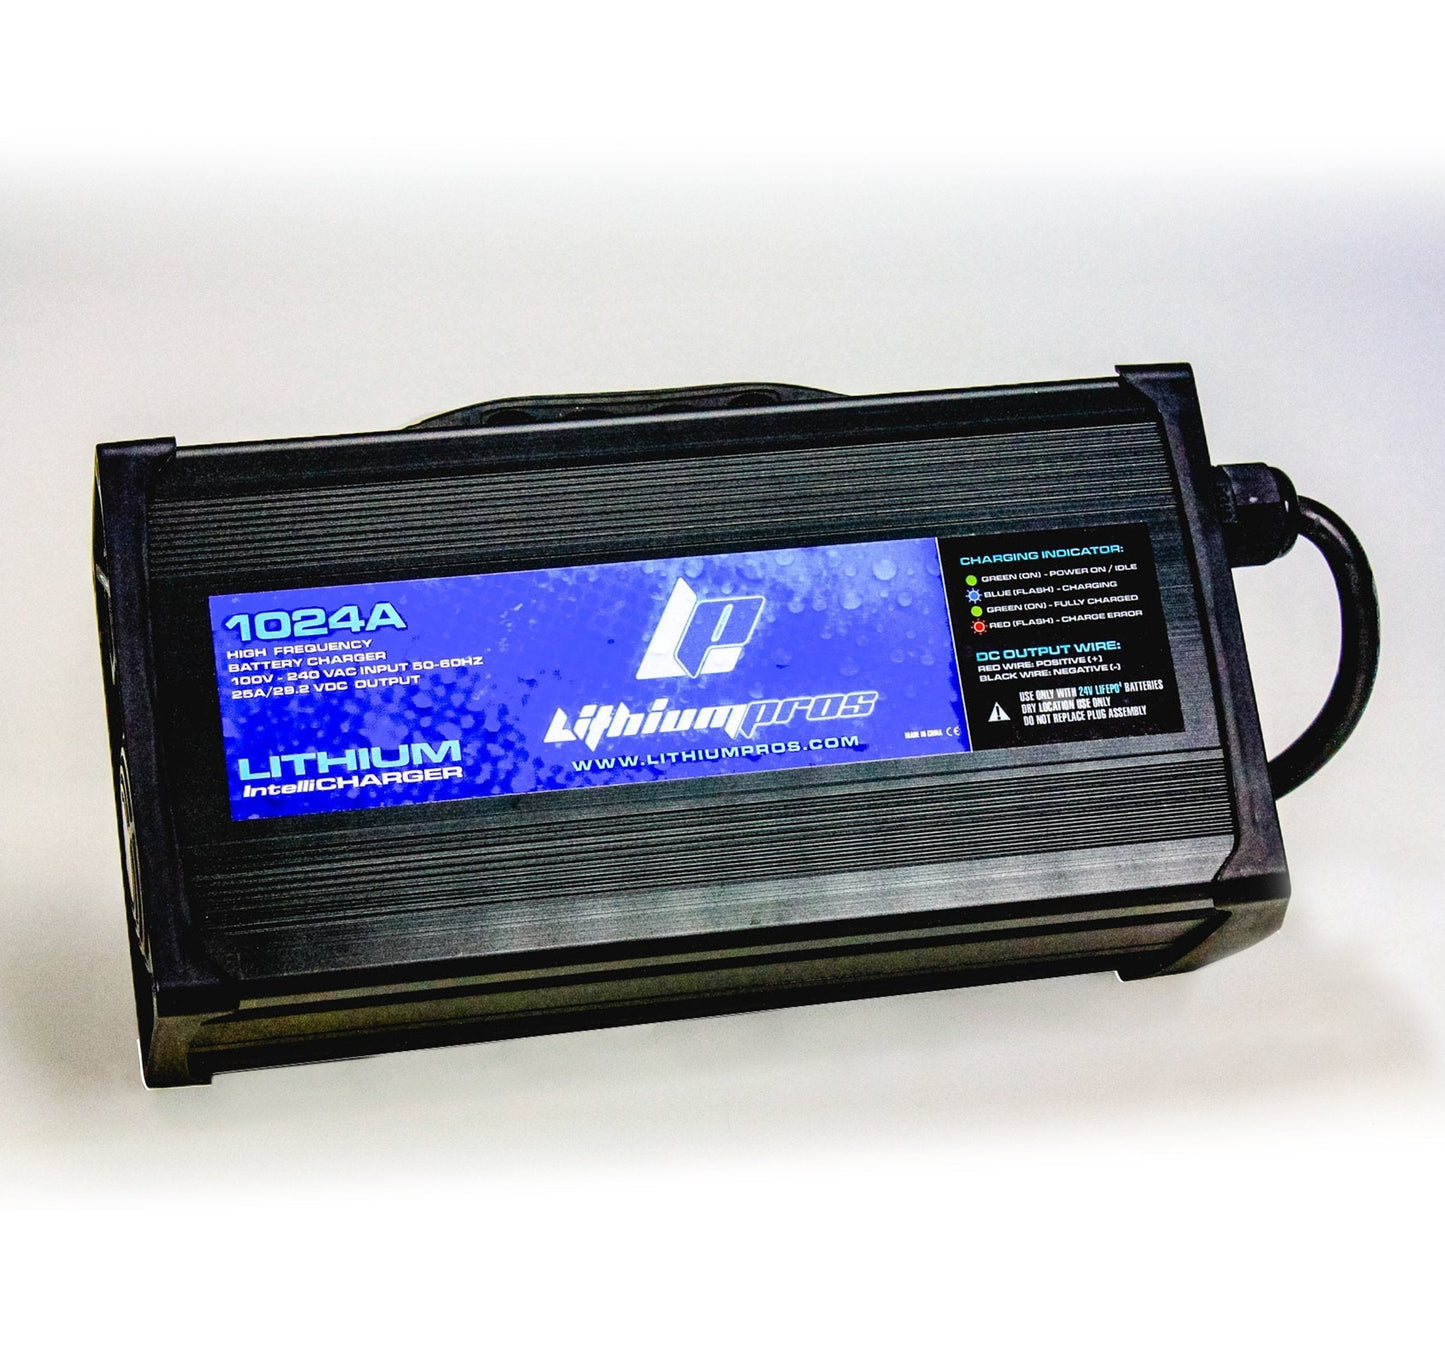 Lithium Pros 1024A 25A/24V Lithium Ion Marine Battery Charger